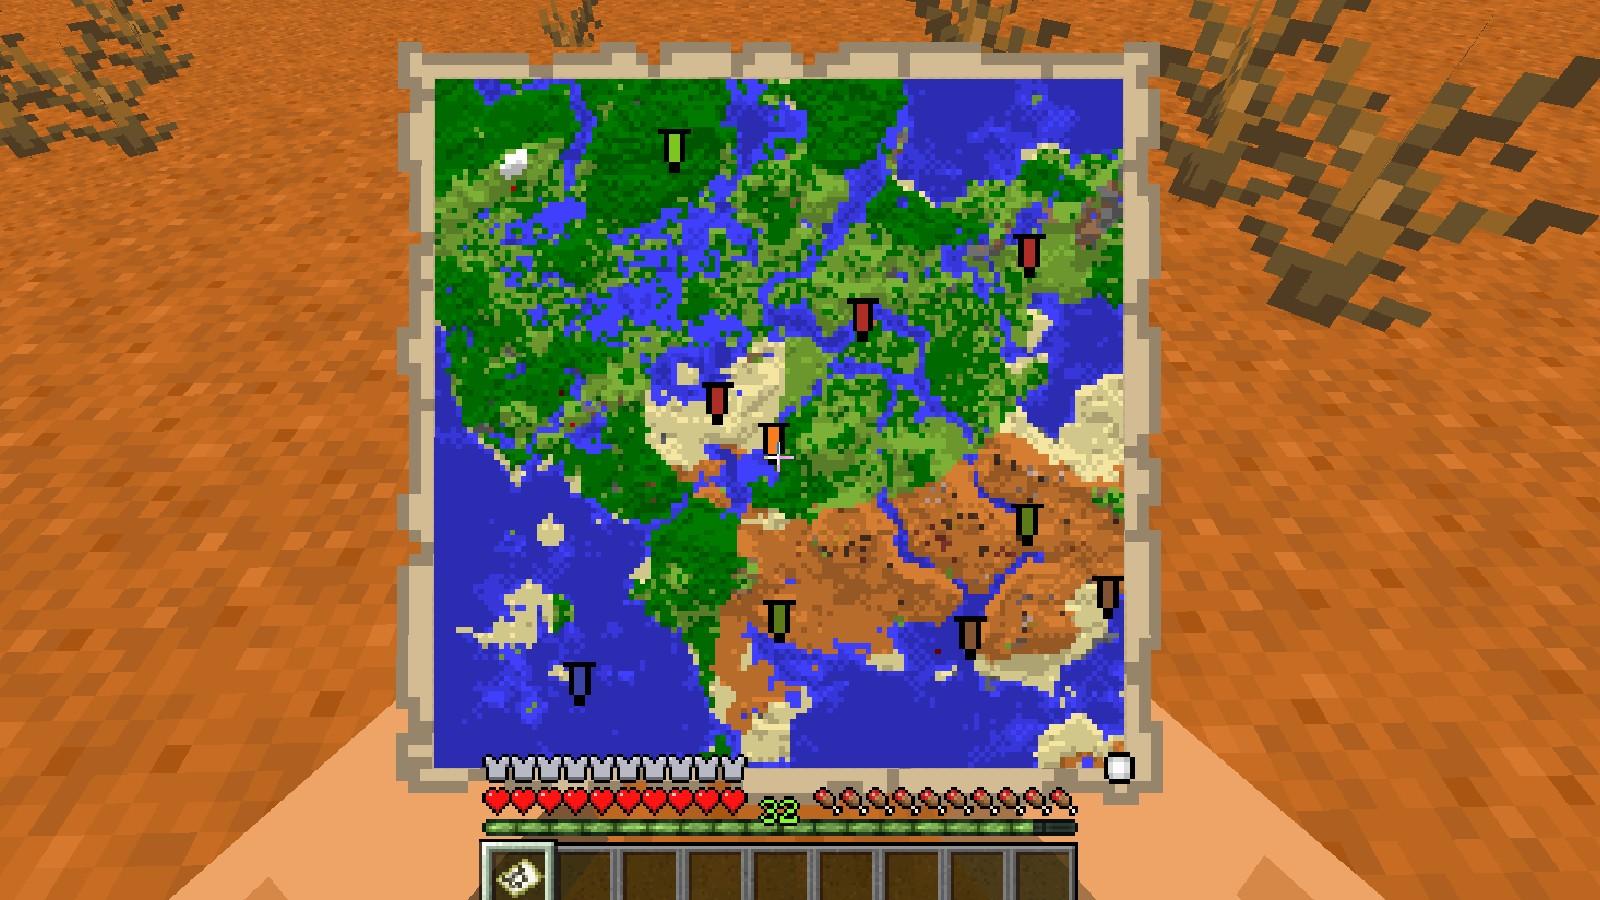 Completed Minecraft map